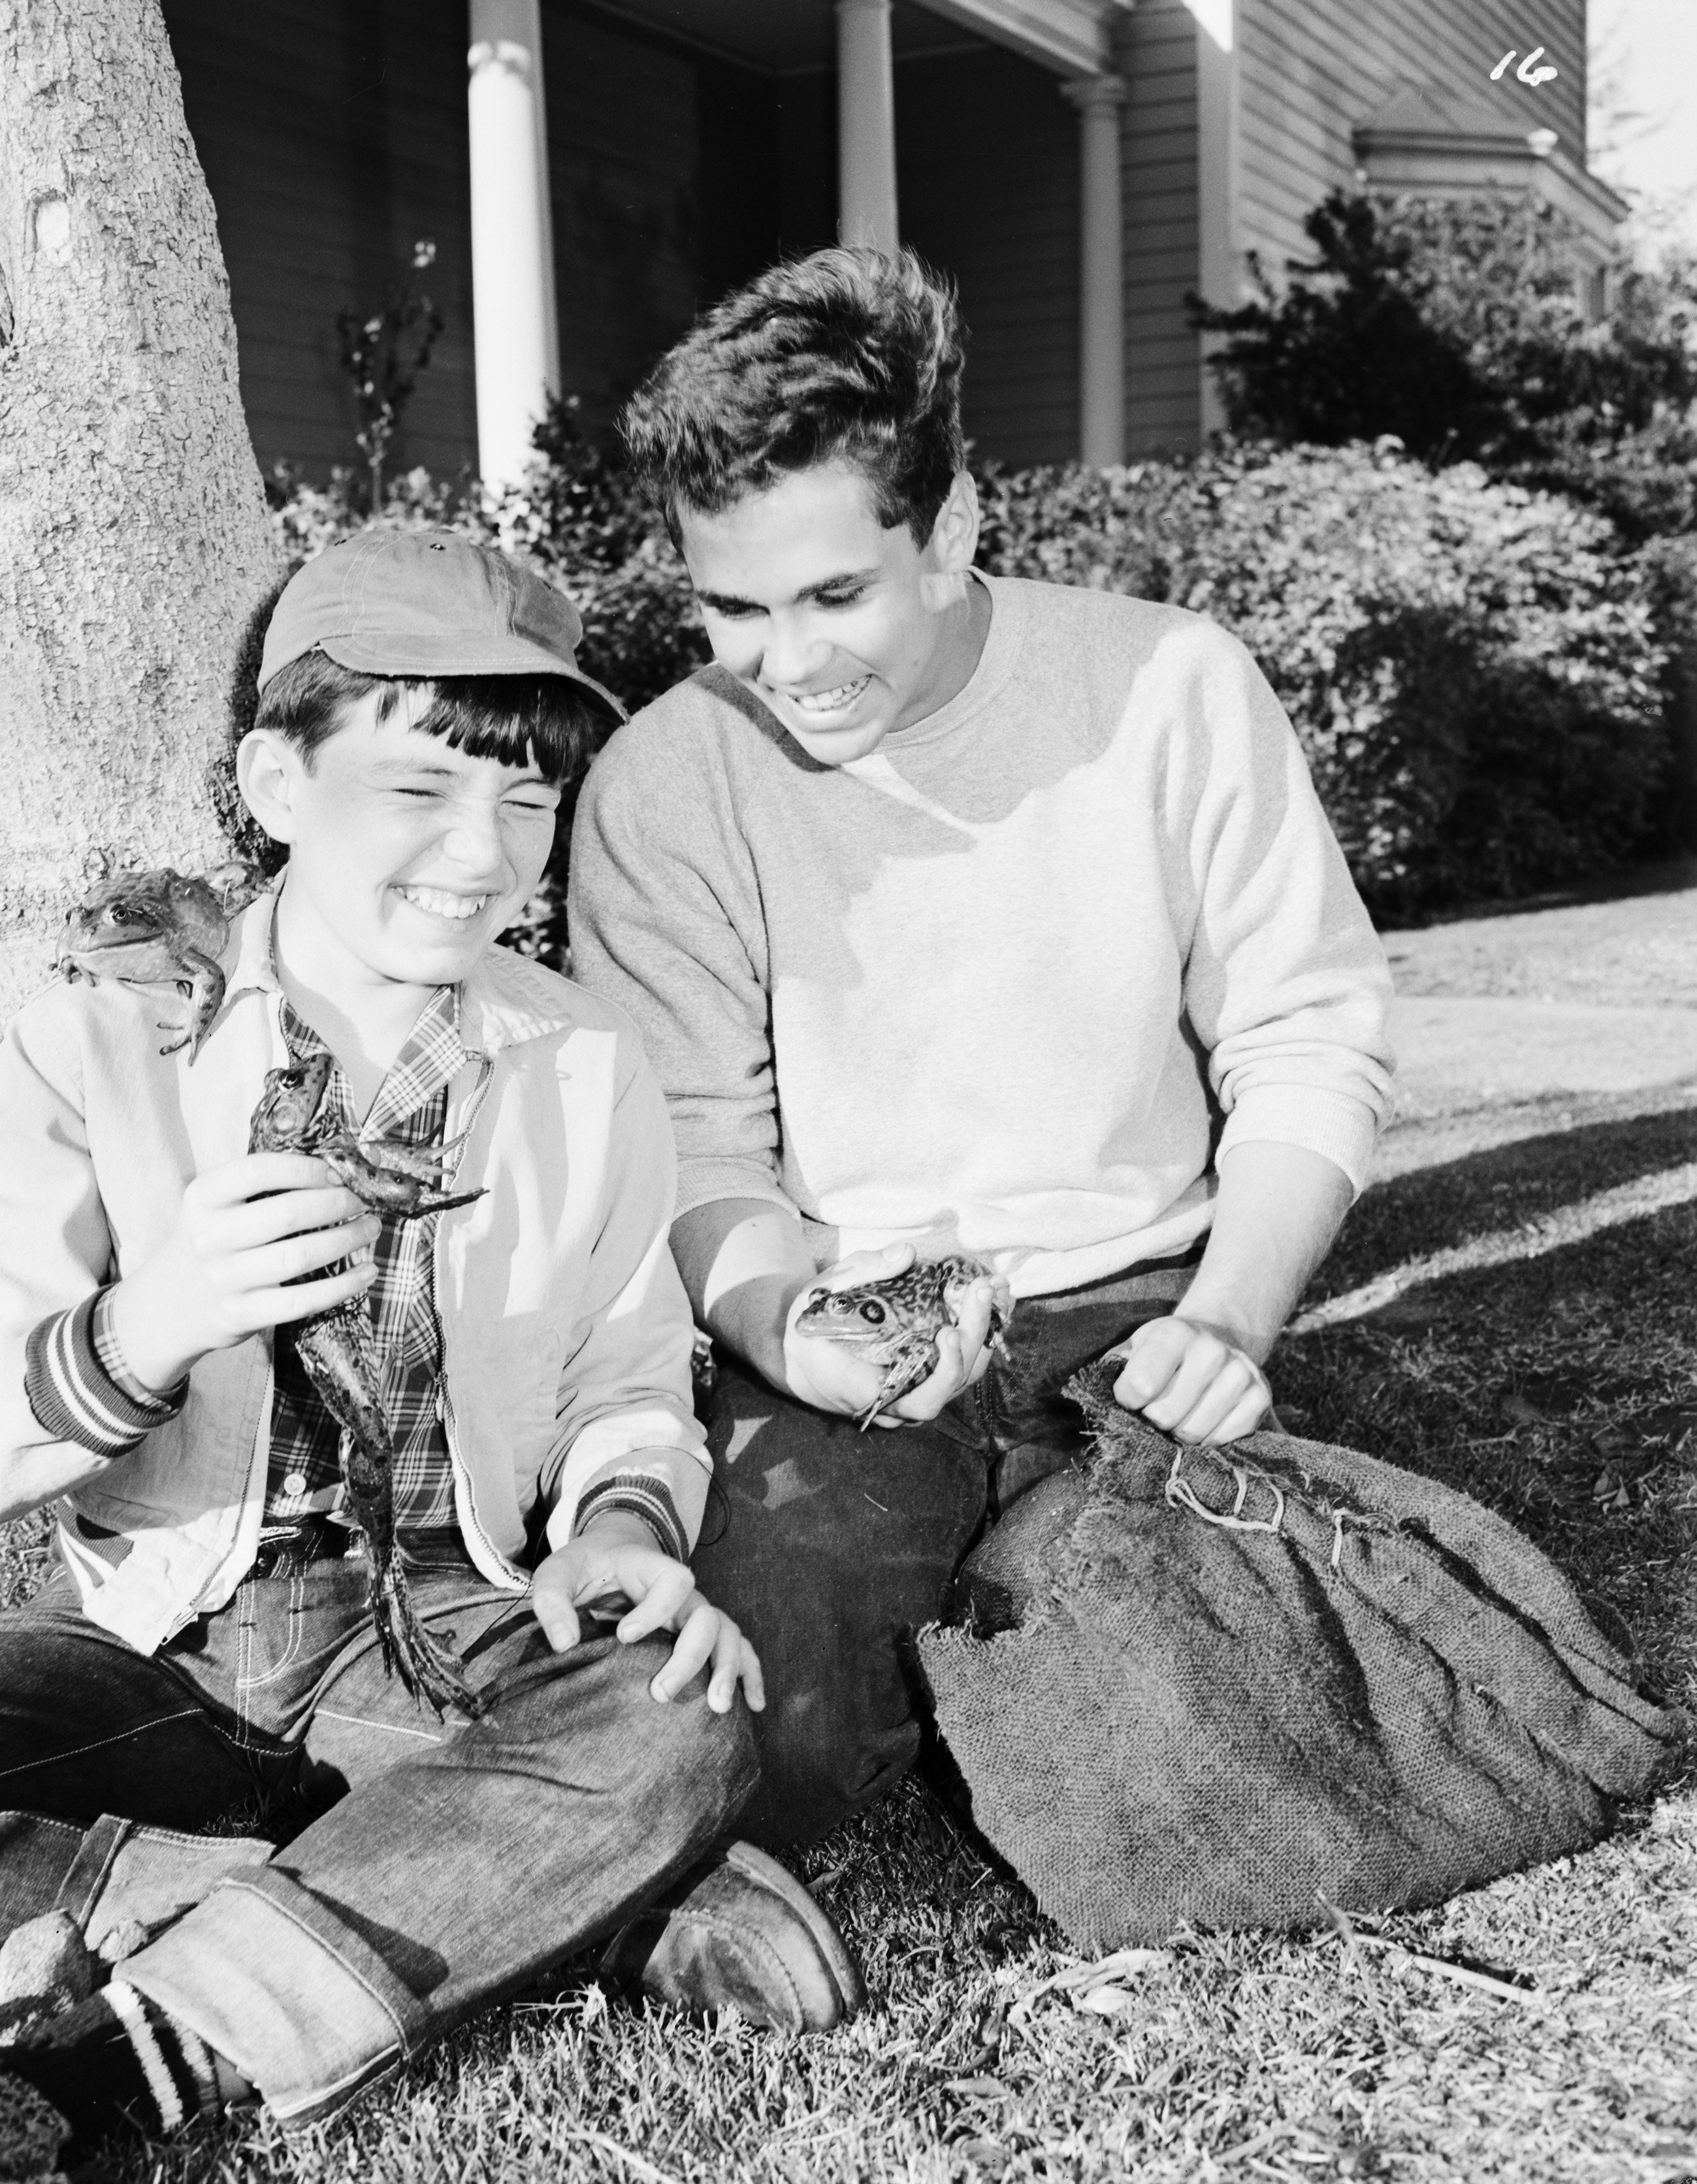 Jerry Mathers and Tony Dow smile as they sit next to each other and hold frogs